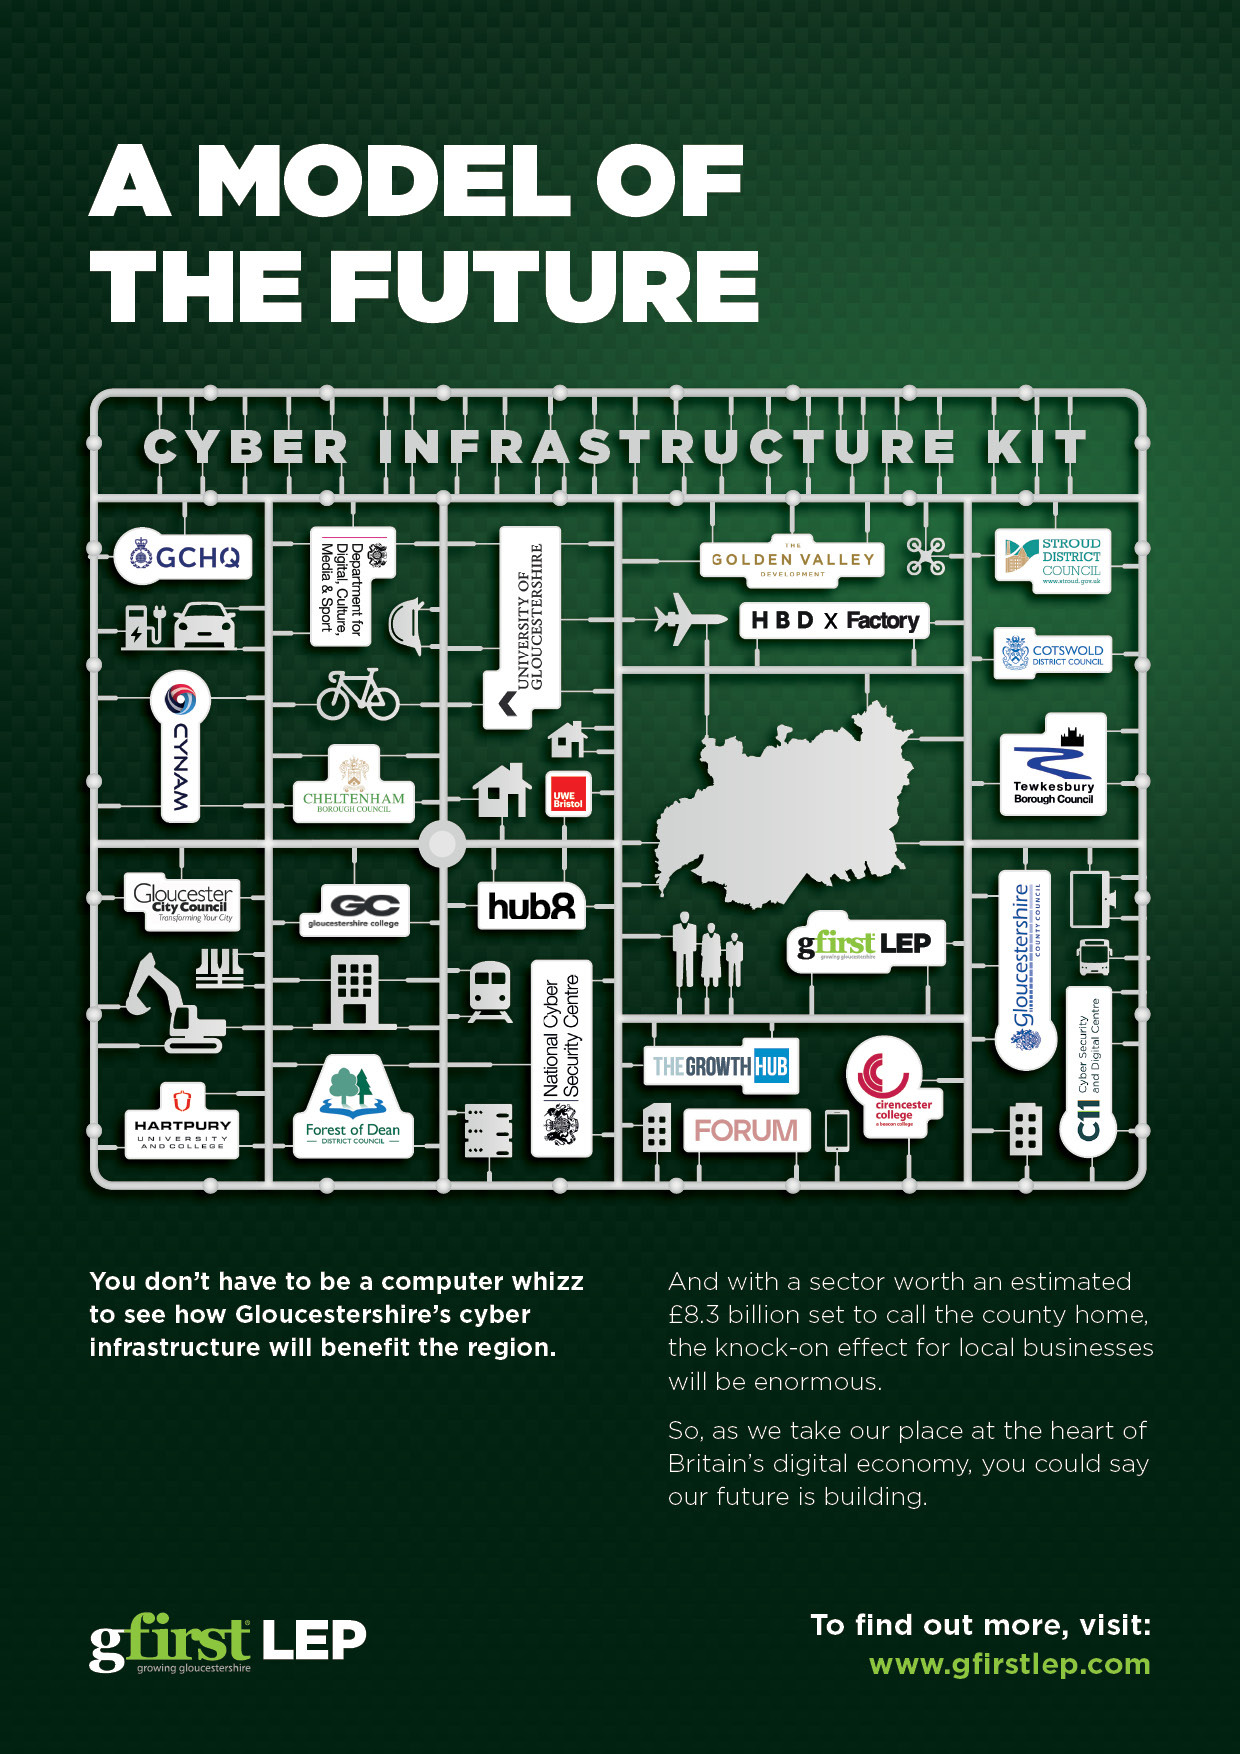 GFirst LEP's cyber infrastructure advert, featuring local companies contributing to Gloucestershire's cyber economy in a model sprue layout